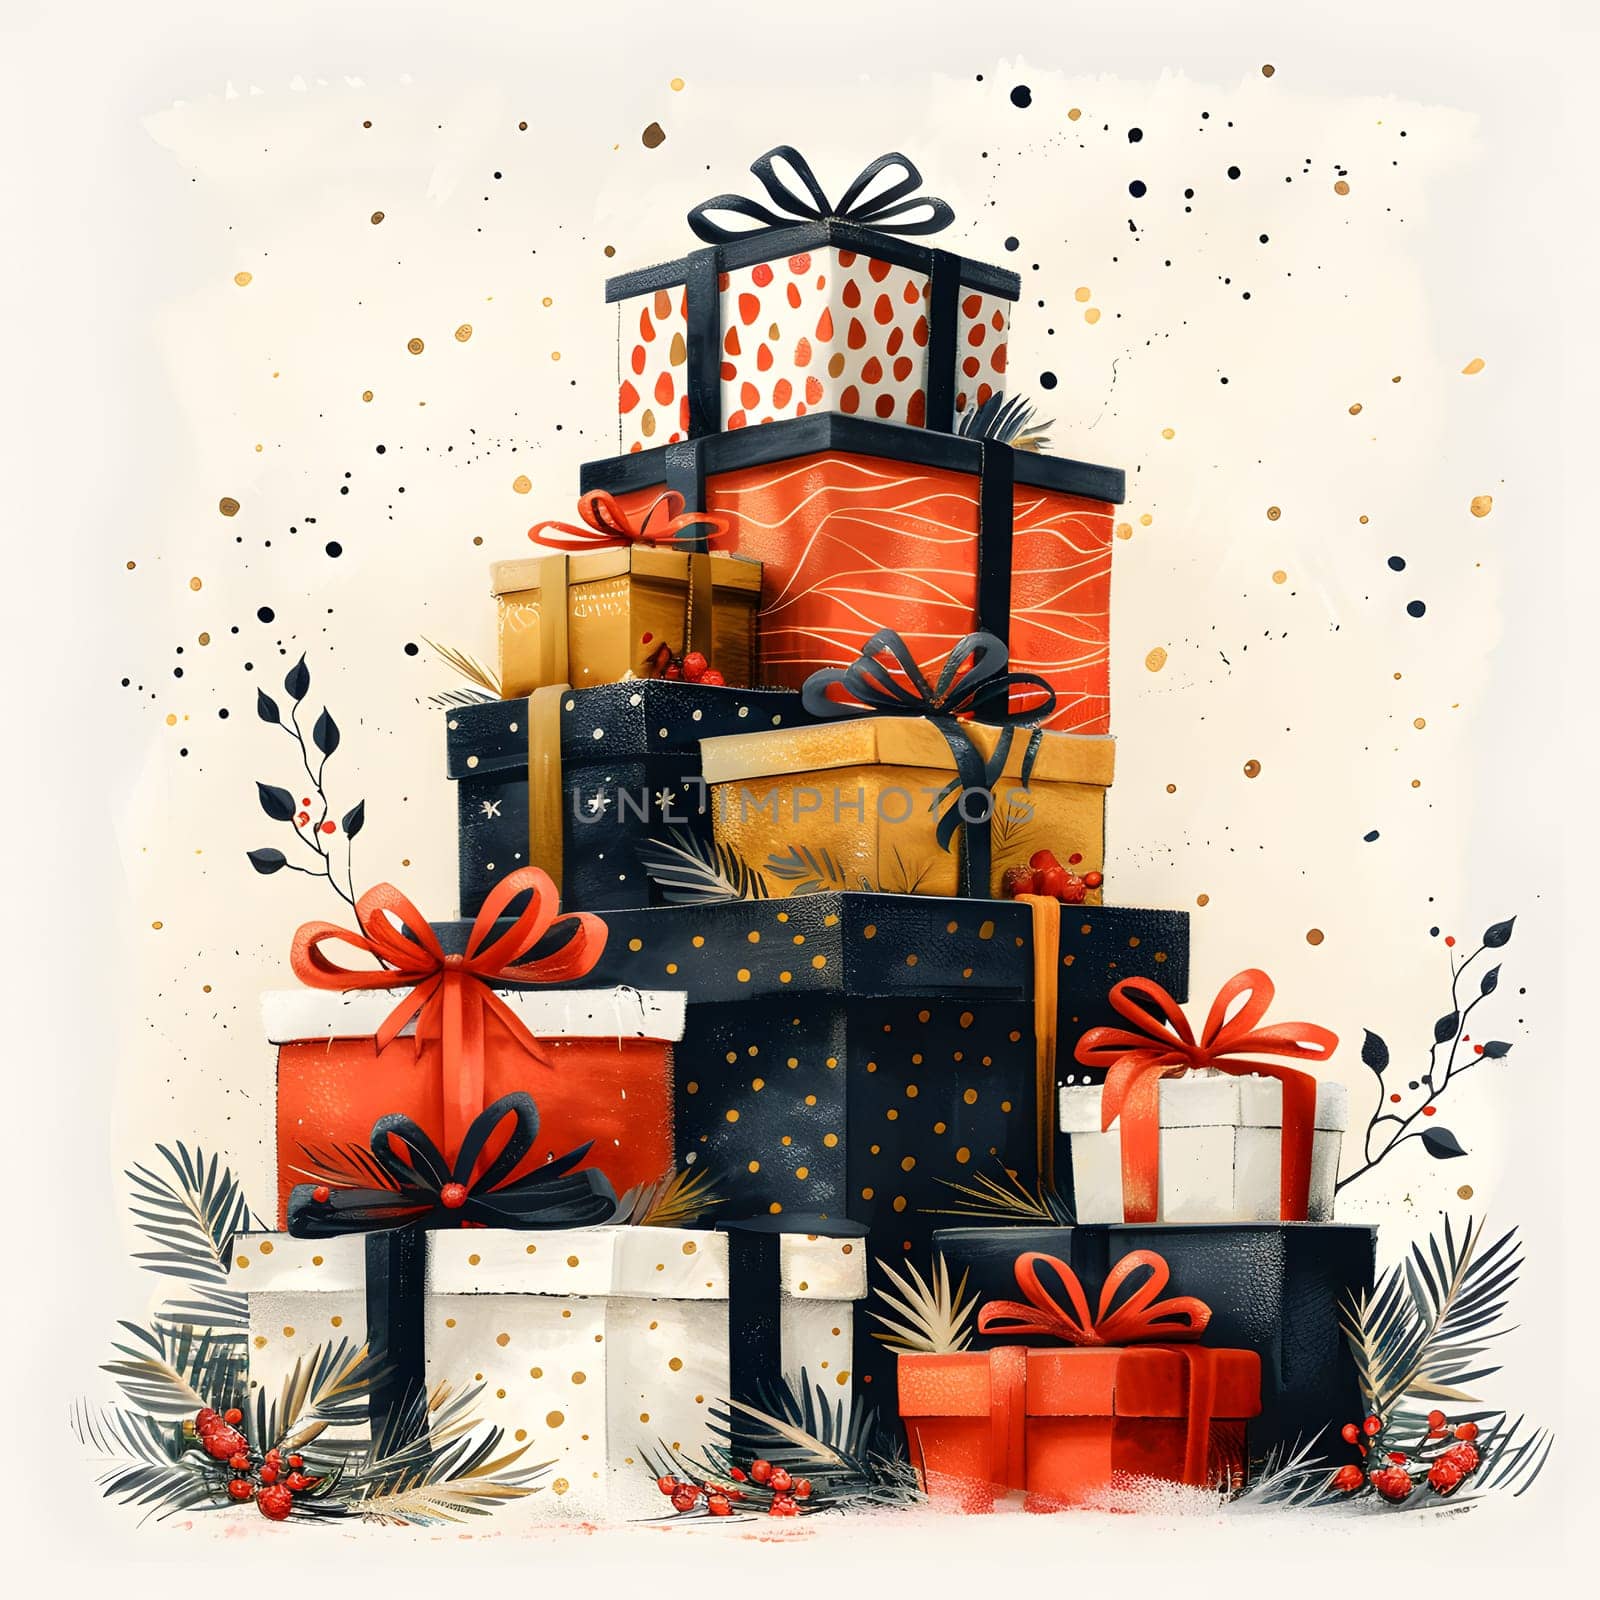 A stack of Christmas presents forms a colorful rectangle, resembling a creative arts painting. The display is as artistic as a lighthouse painting